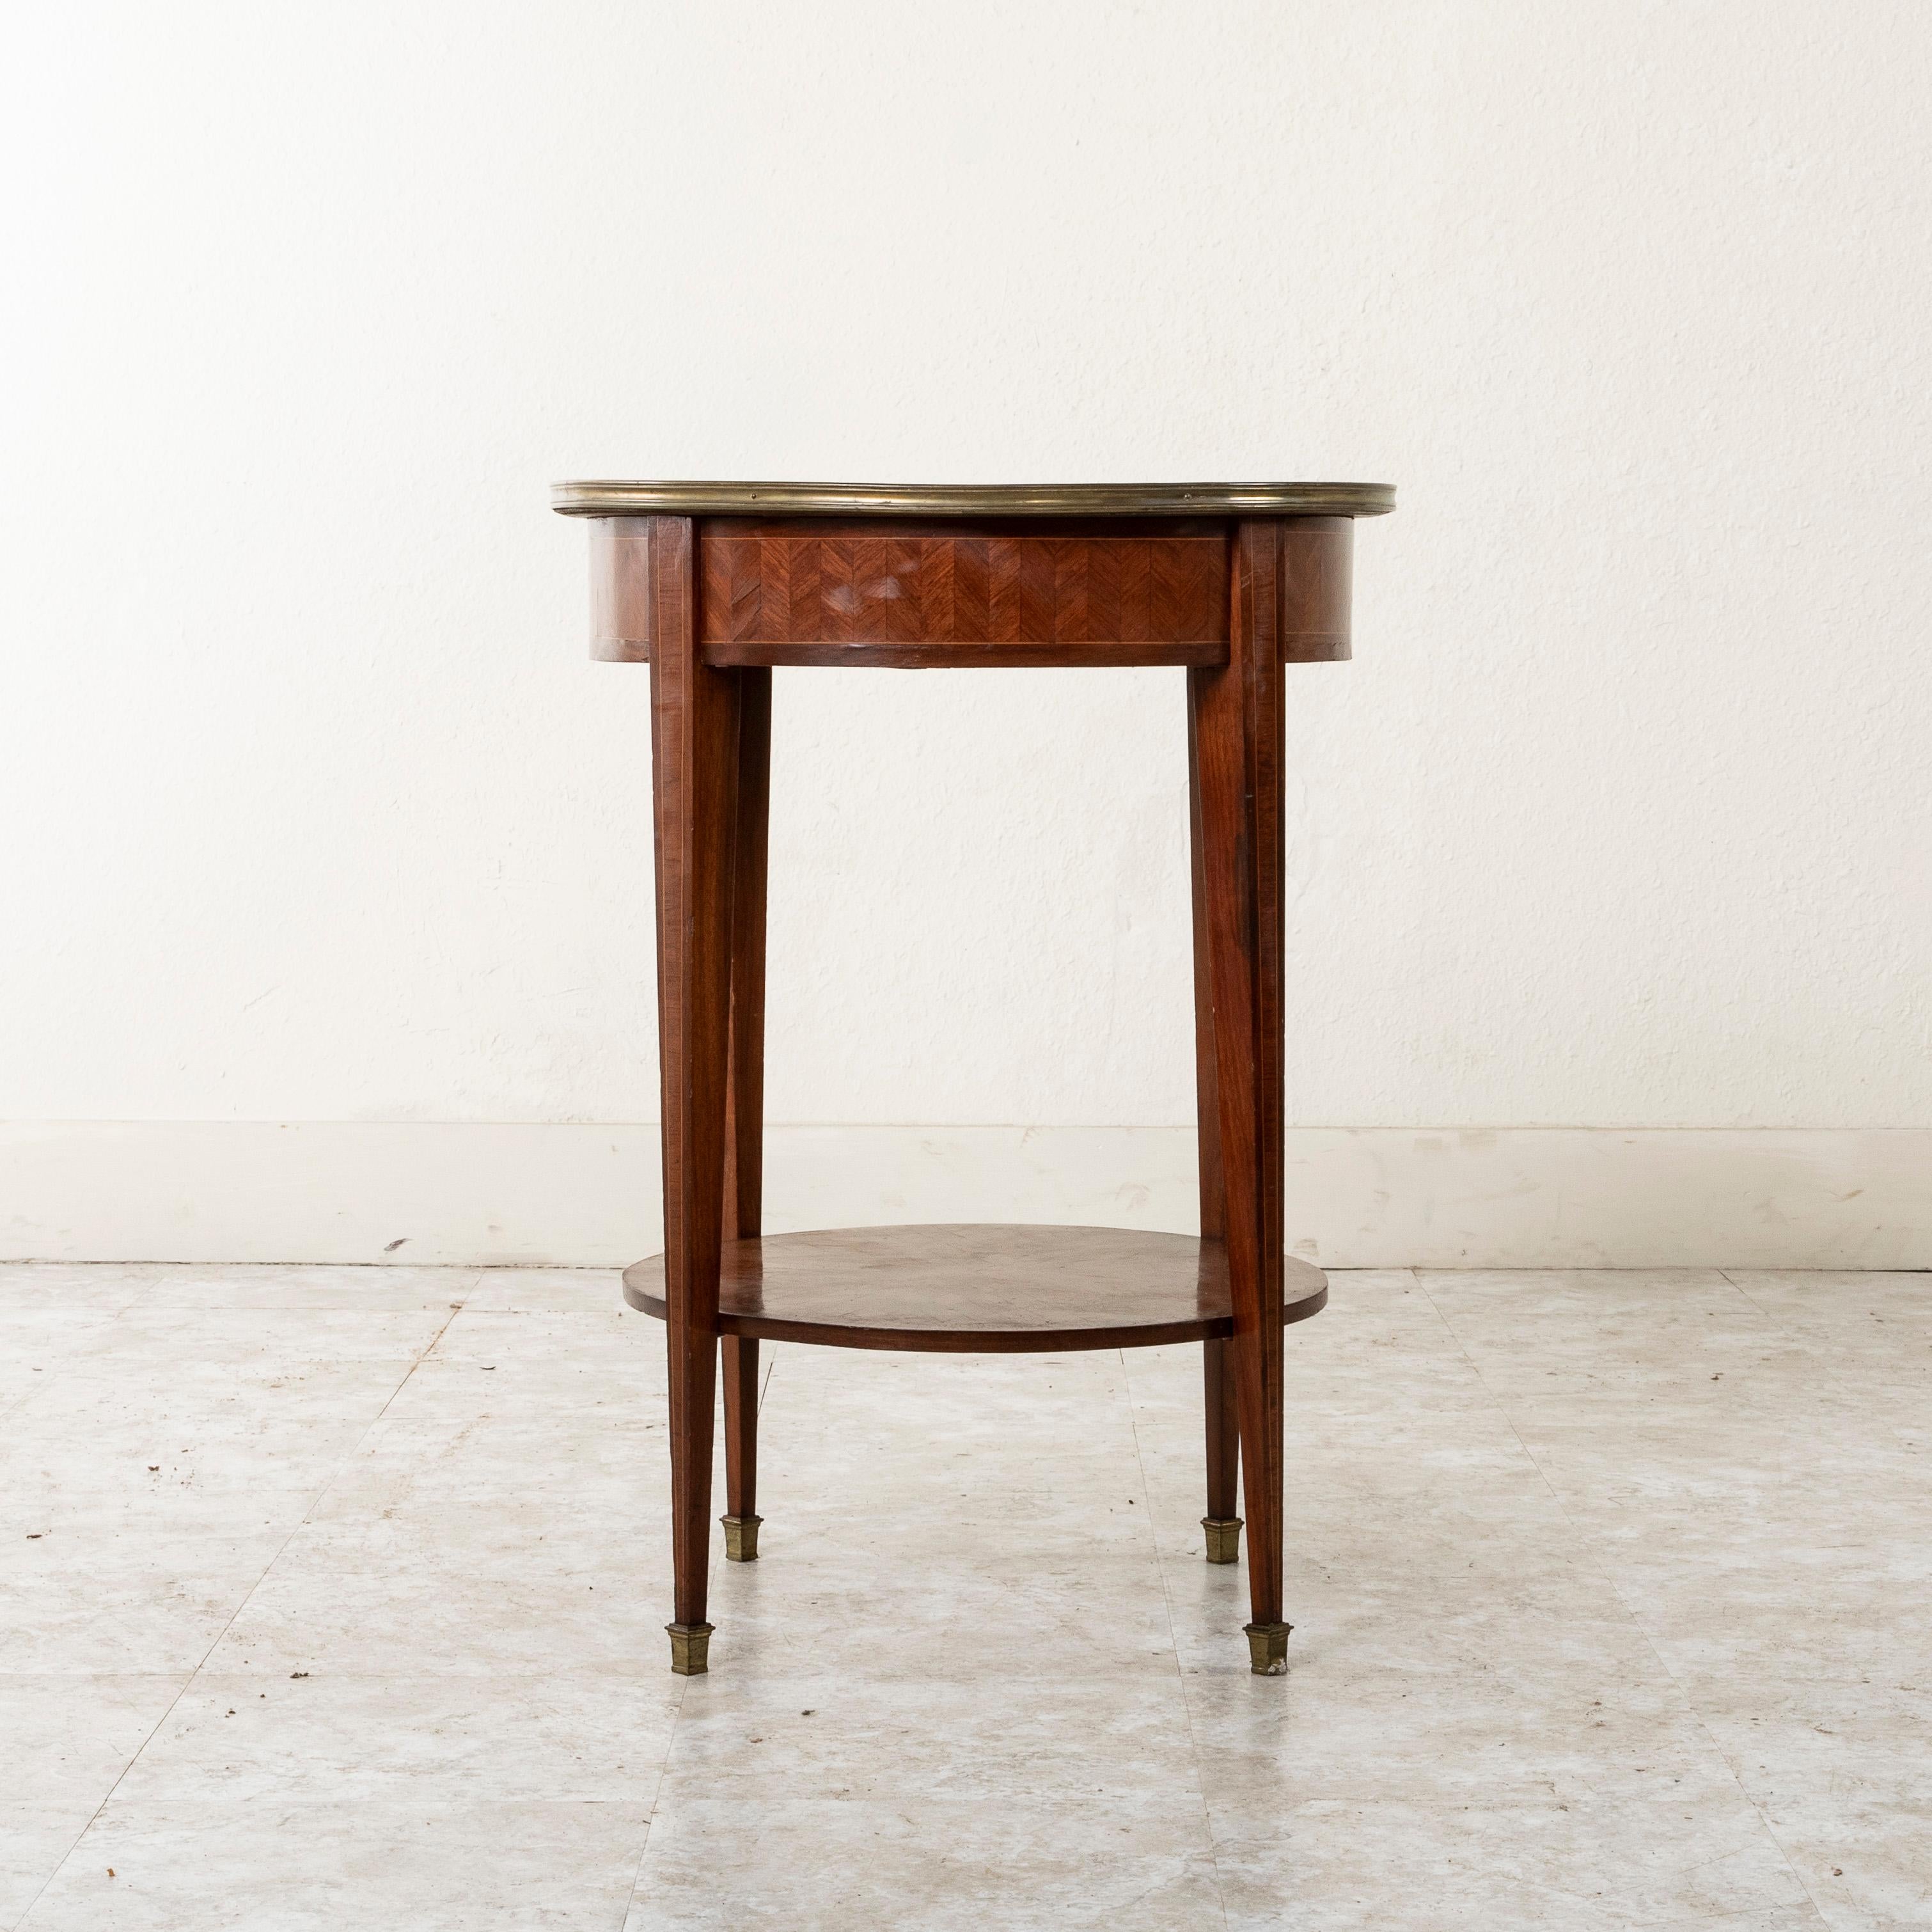 Late 19th Century French Louis XVI Style Rosewood Marquetry Gueridon Side Table For Sale 1